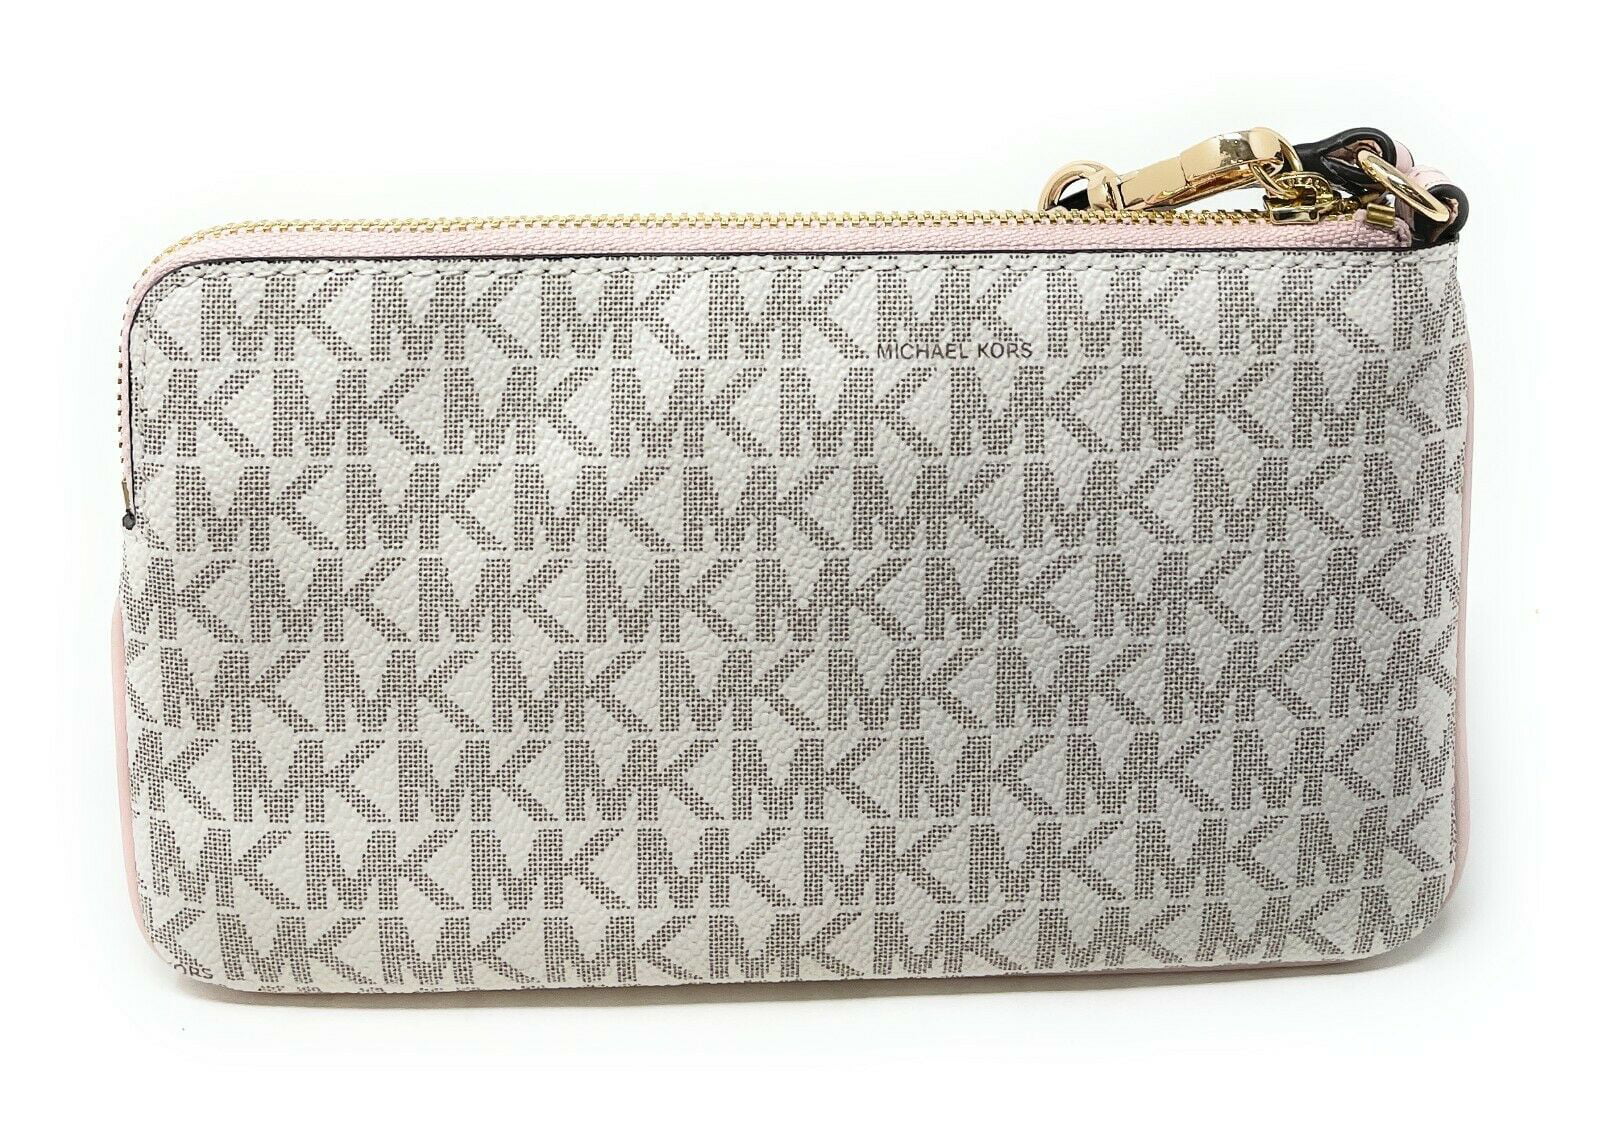 MICHAEL KORS #33169 Navy Blue Canvas Wristlet Wallet – ALL YOUR BLISS